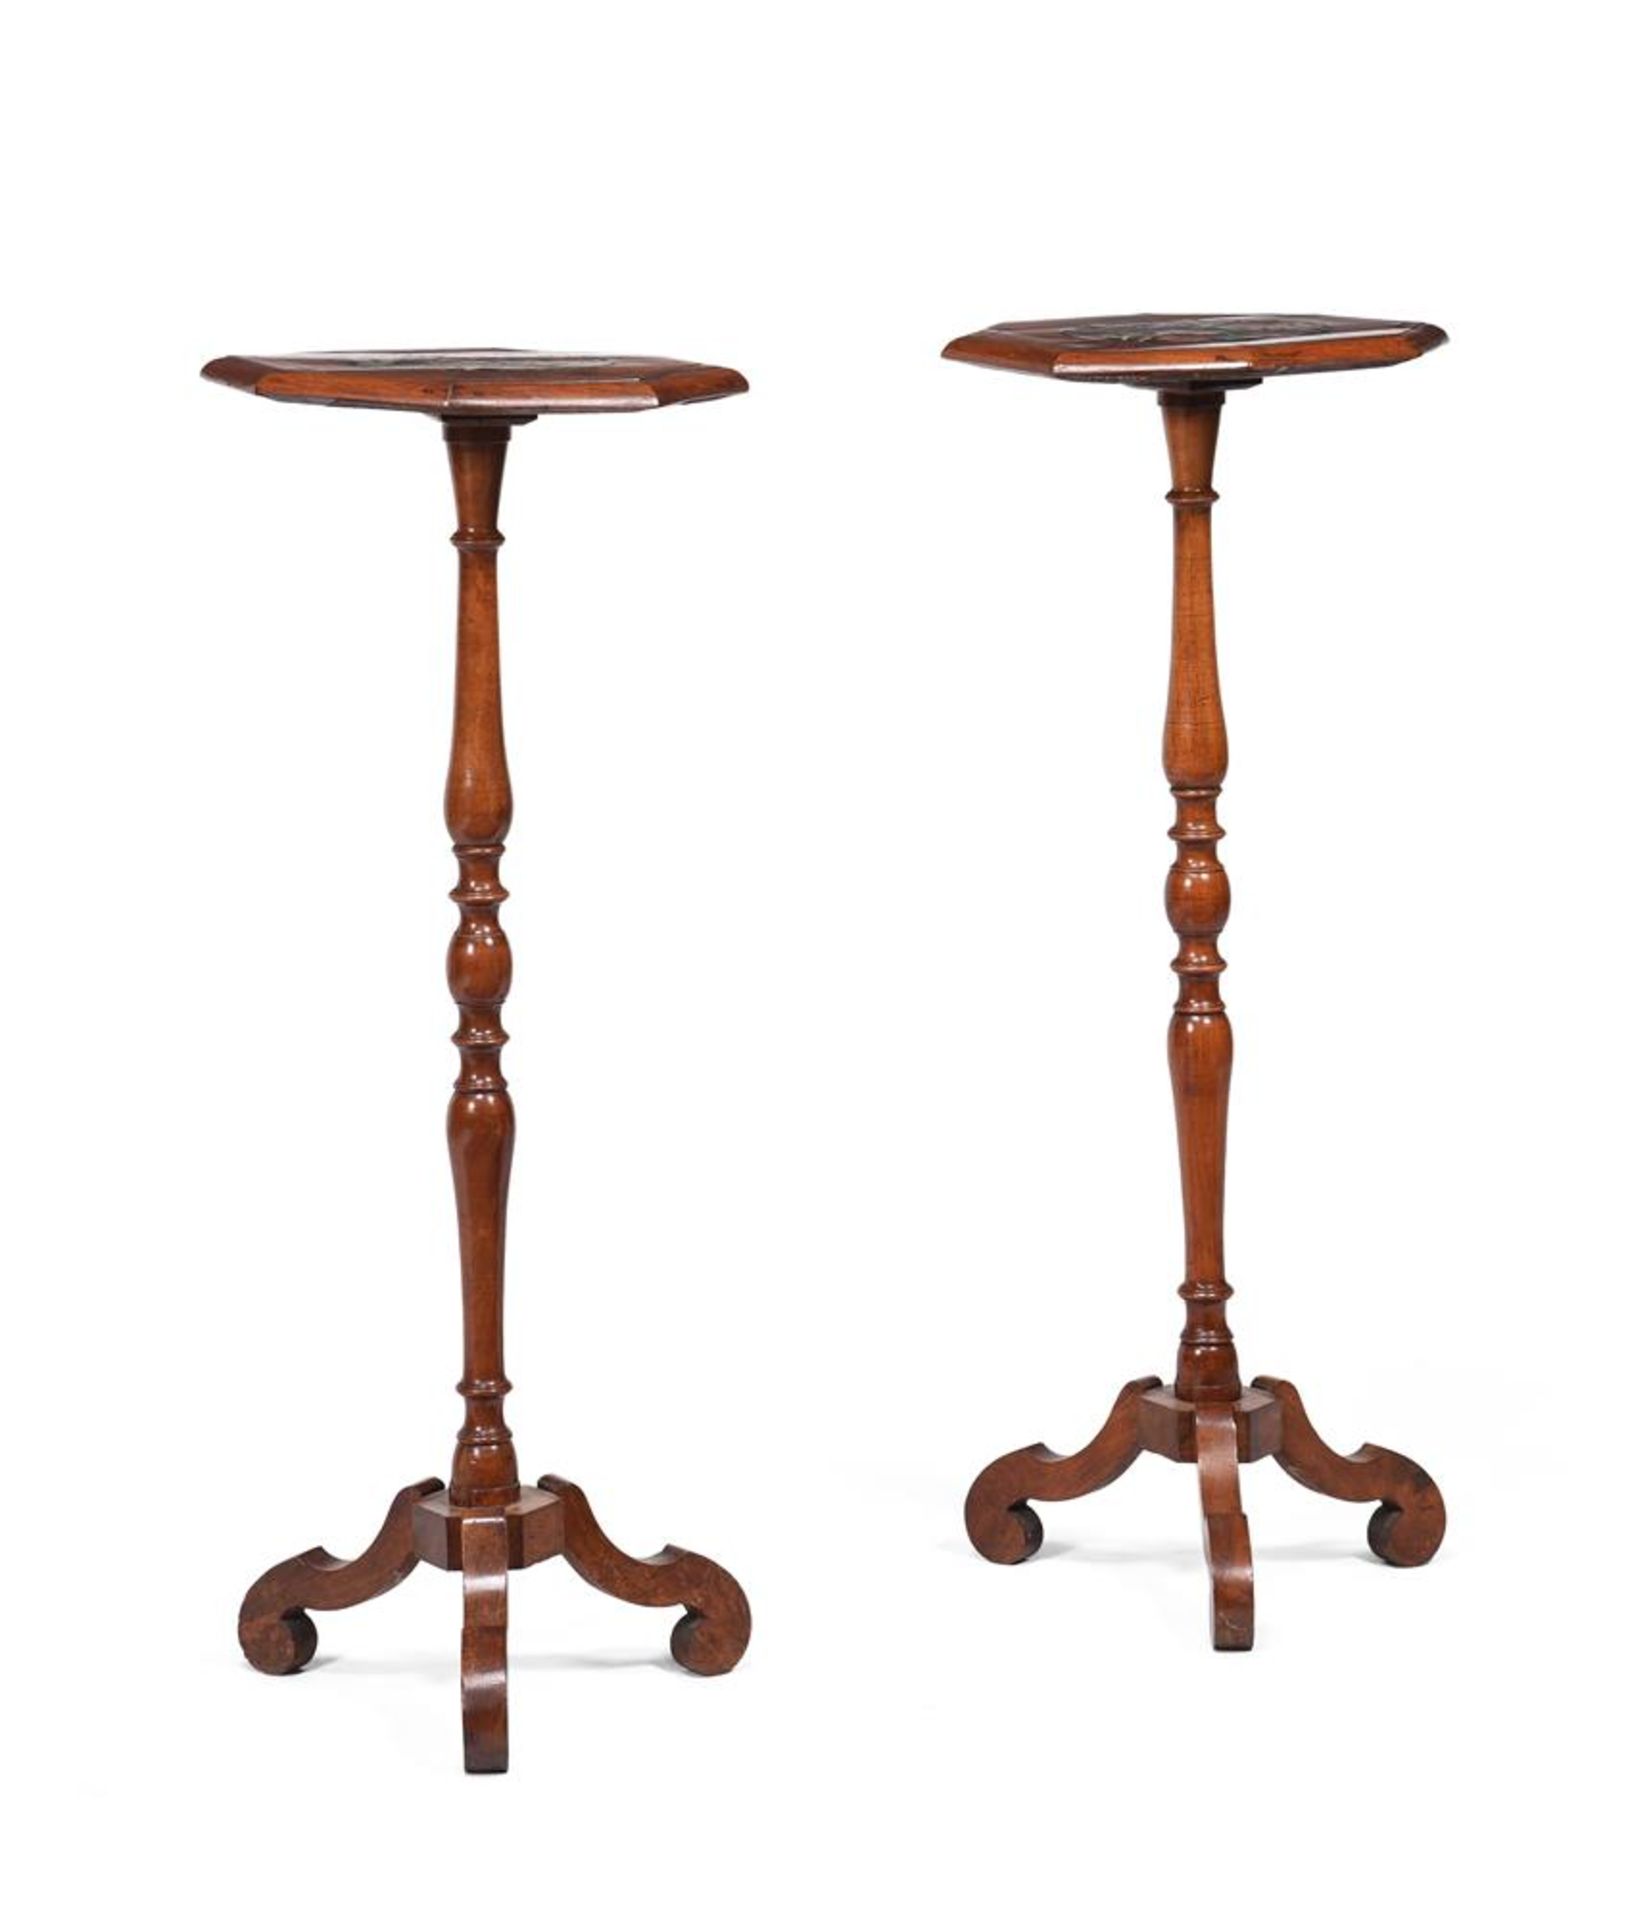 A PAIR OF WALNUT AND MARQUETRY CANDLE STANDS, 17TH CENTURY AND LATER ELEMENTS - Image 4 of 4